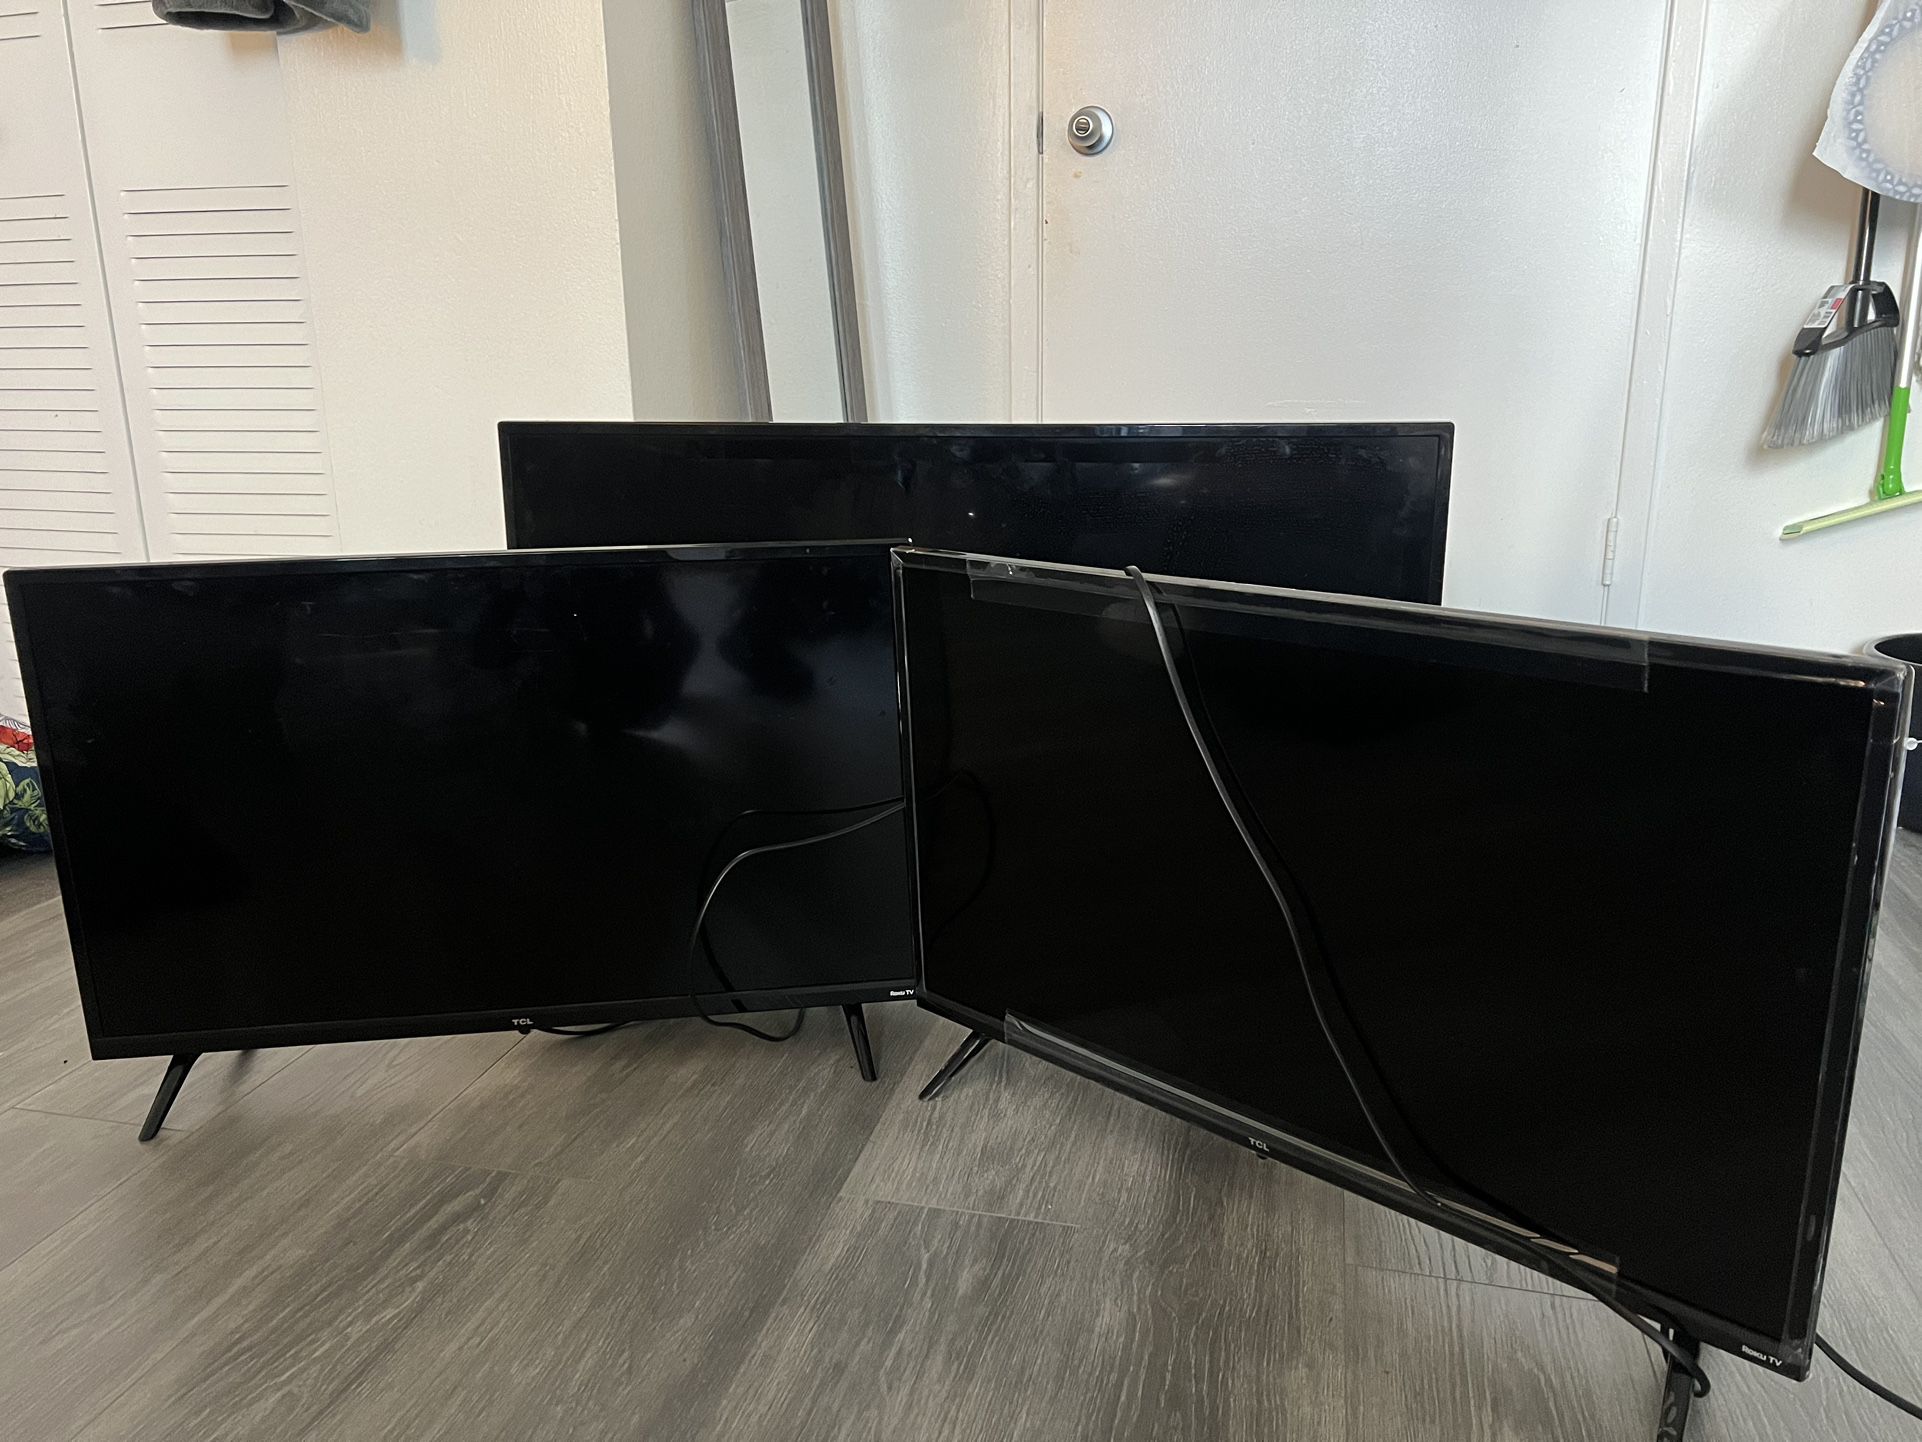 3 TVs For $350